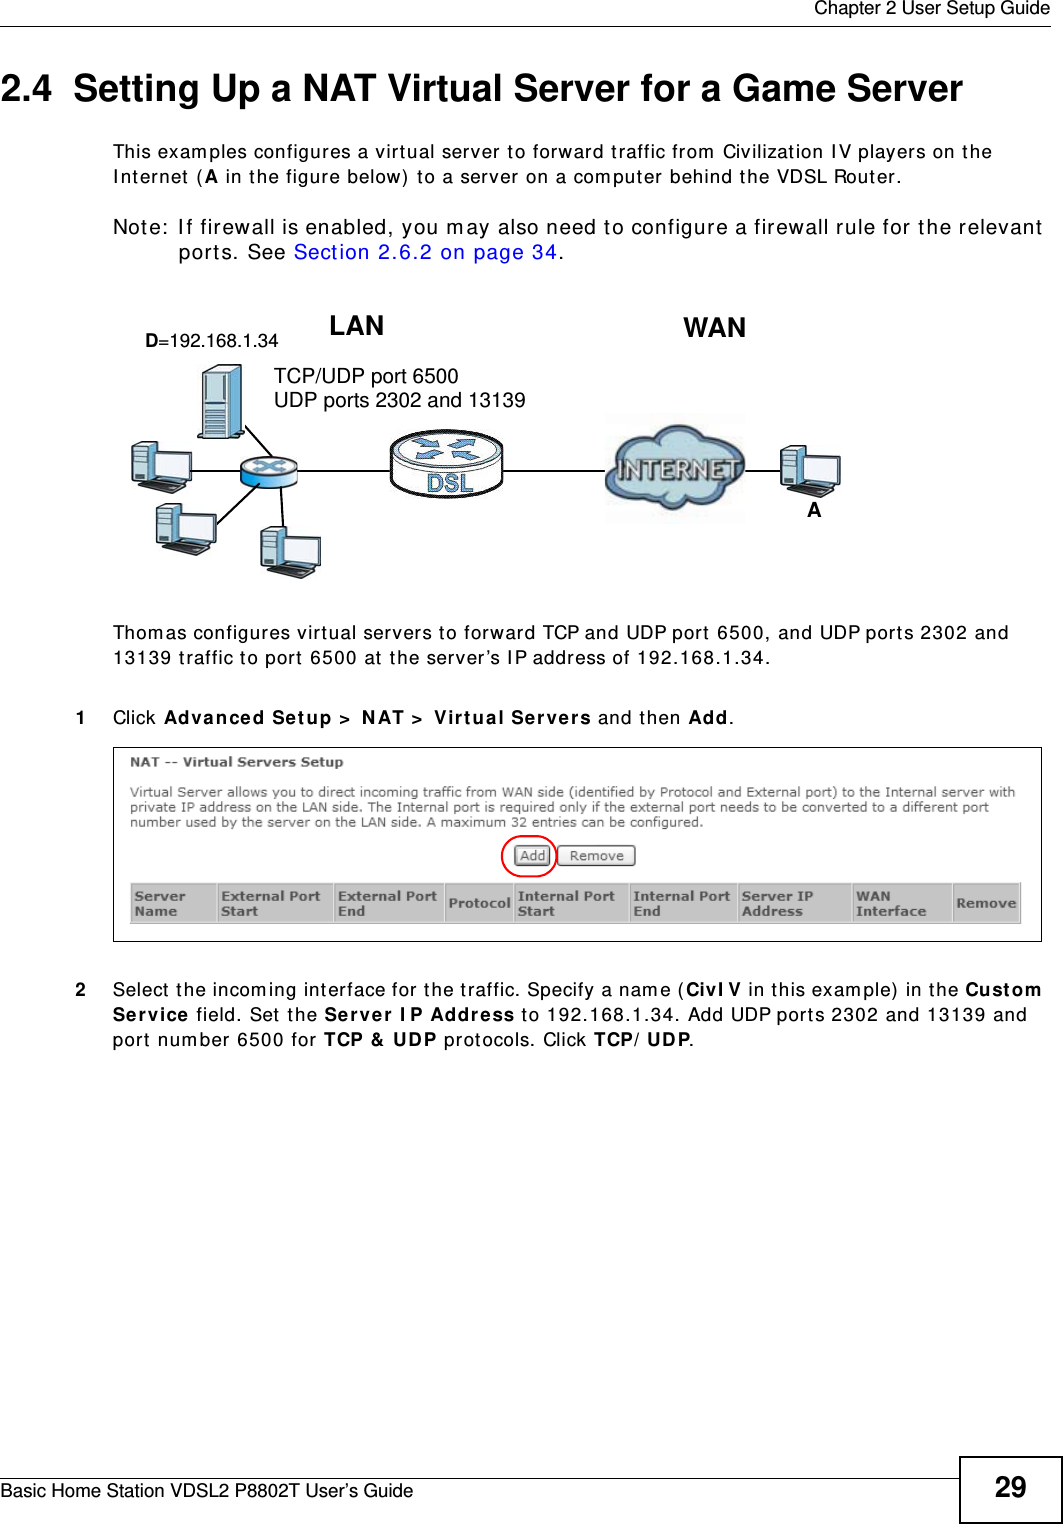  Chapter 2 User Setup GuideBasic Home Station VDSL2 P8802T User’s Guide 292.4  Setting Up a NAT Virtual Server for a Game ServerThis exam ples configures a virtual server t o forward t raffic from  Civilizat ion I V player s on t he I nt ernet  ( A in t he figure below) t o a server on a com put er behind the VDSL Router.Not e:  I f  fir ewall is enabled, you  m ay also need t o configu r e a fir ewall rule f or t he relevant  ports. See Sect ion 2.6.2 on page 34.Tutorial: NAT Port Forwarding Setup Thom as configures virtual servers t o forwar d TCP and UDP port  6500, and UDP por ts 2302 and 13139 t raffic t o port 6500 at the server’s I P address of 192.168.1.34.1Click Advance d Setup &gt;  NAT &gt;  Virt ua l Se rver s and then Add.2Select  the incom ing int er face for the traffic. Specify a nam e ( CivI V in this exam ple) in the Cu st om  Se rvice field. Set the Ser ve r  I P Address to 192.168.1.34. Add UDP ports 2302 and 13139 and port  num ber 6500 for TCP &amp;  UDP prot ocols. Click TCP/ UD P.D=192.168.1.34 WANLANTCP/UDP port 6500AUDP ports 2302 and 13139